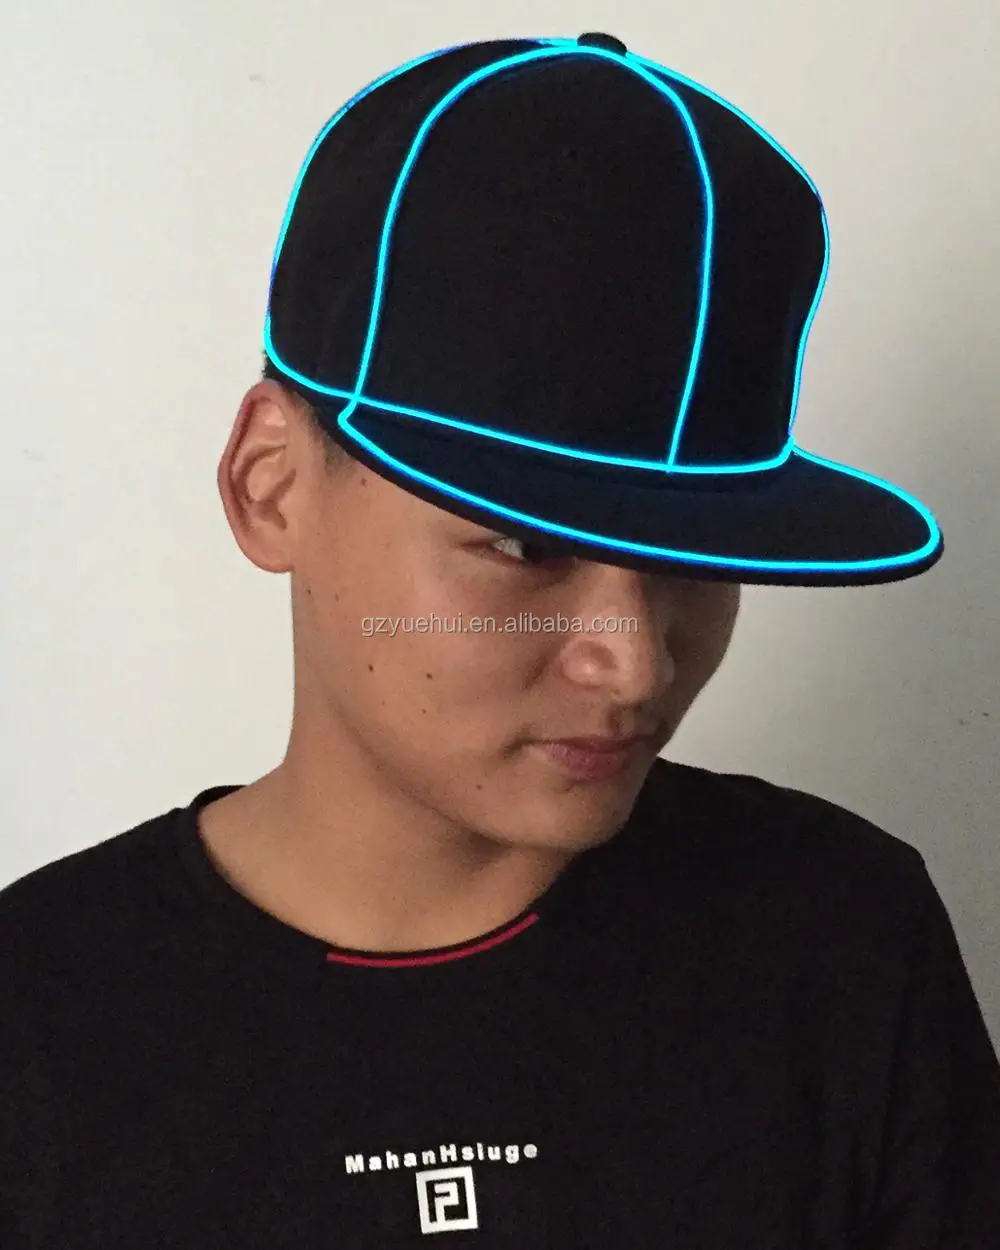 hat with led lights in brim